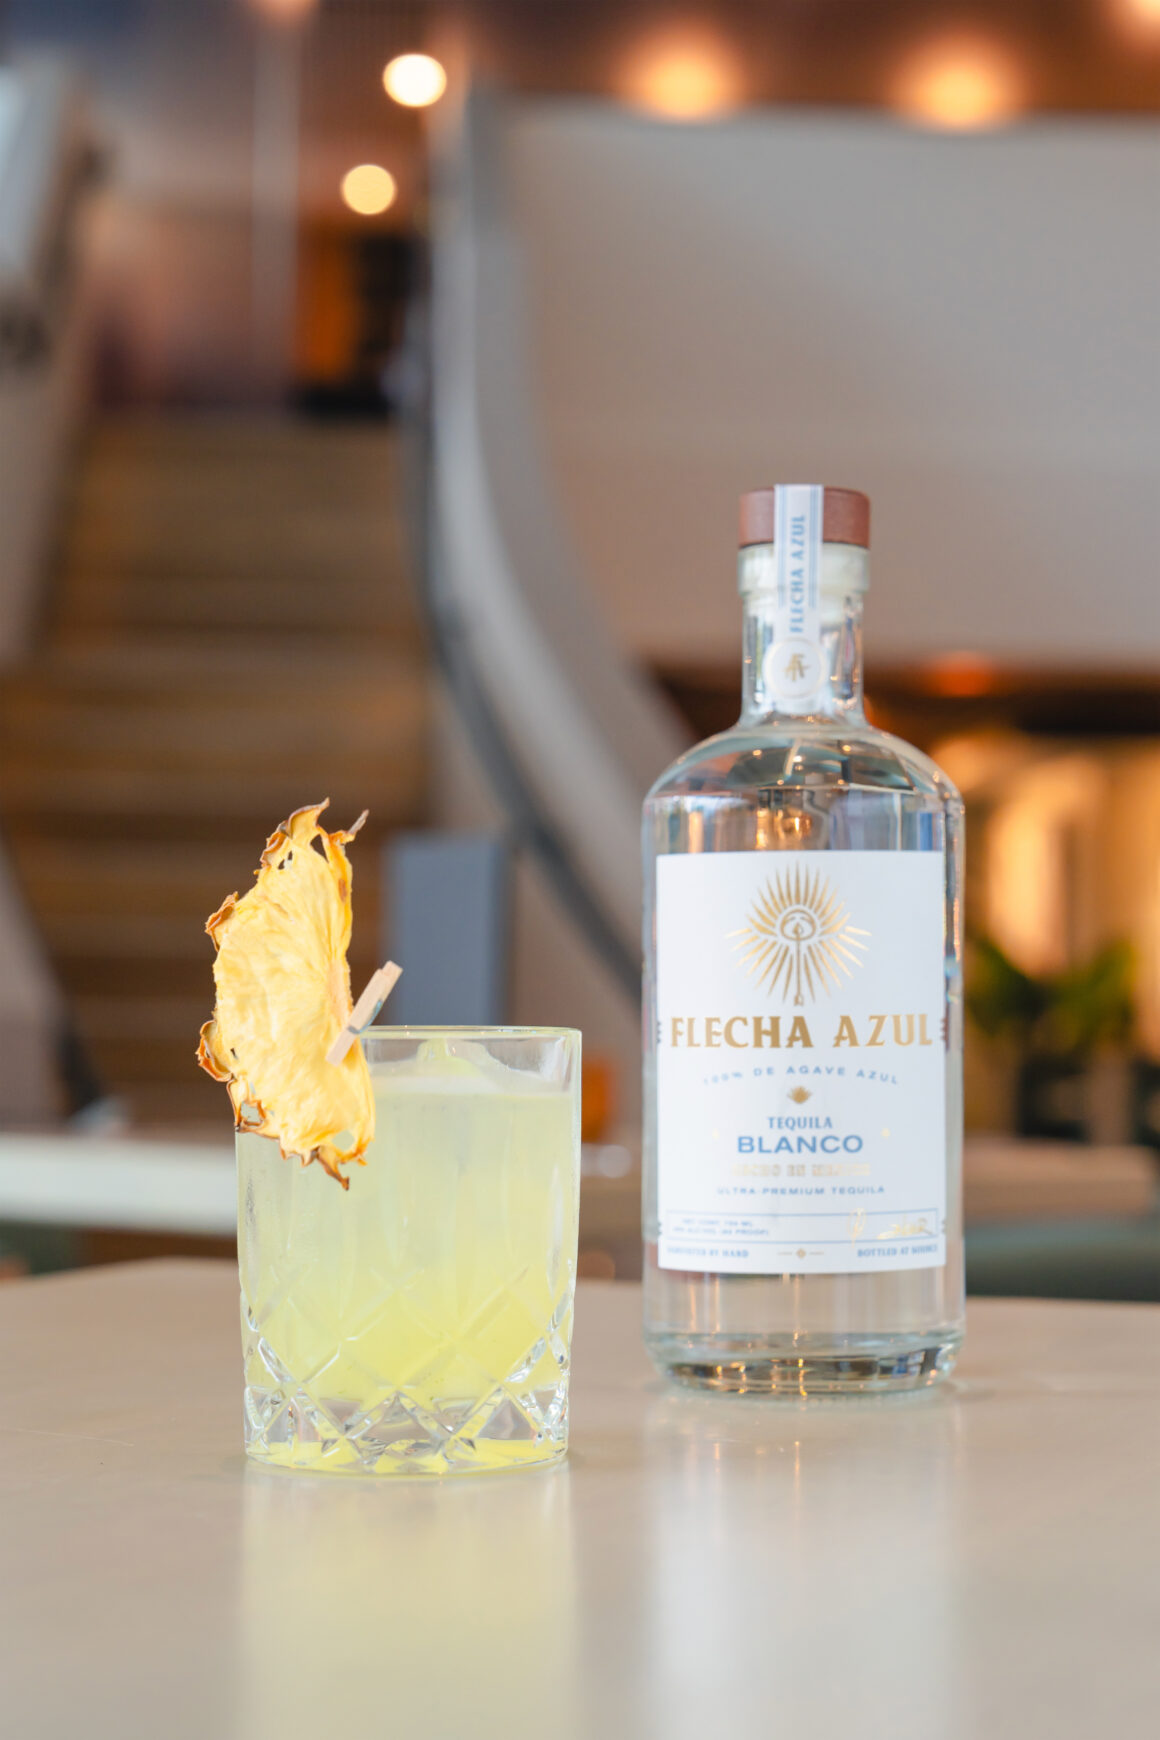 Moxies debuts exclusive cocktail in honour of Mark Wahlberg's tequila arrival in Canada